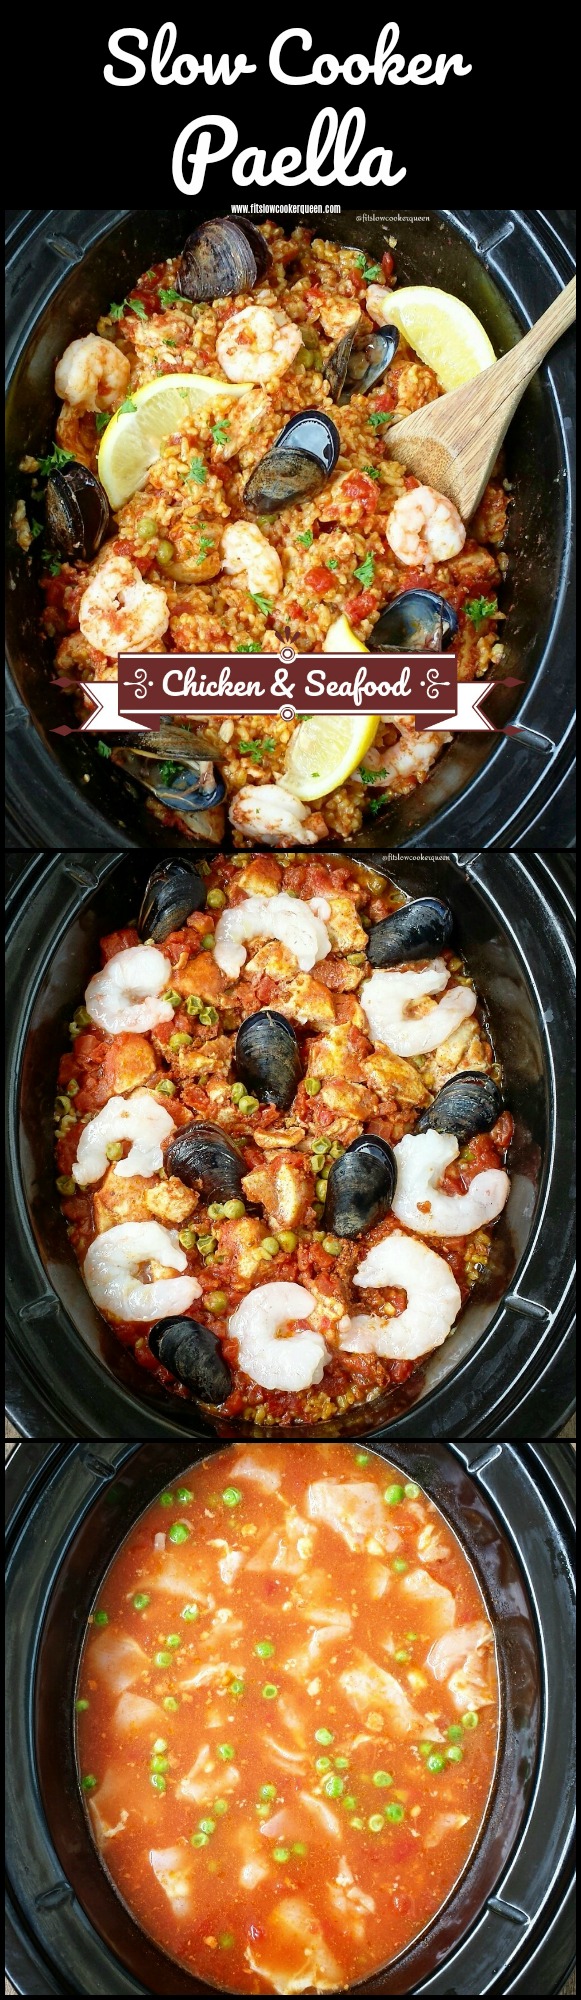 Paella in the slow cooker? Yes! Chicken and seafood are used in this easy and healthy version of paella that cooks in just a couple hours time.